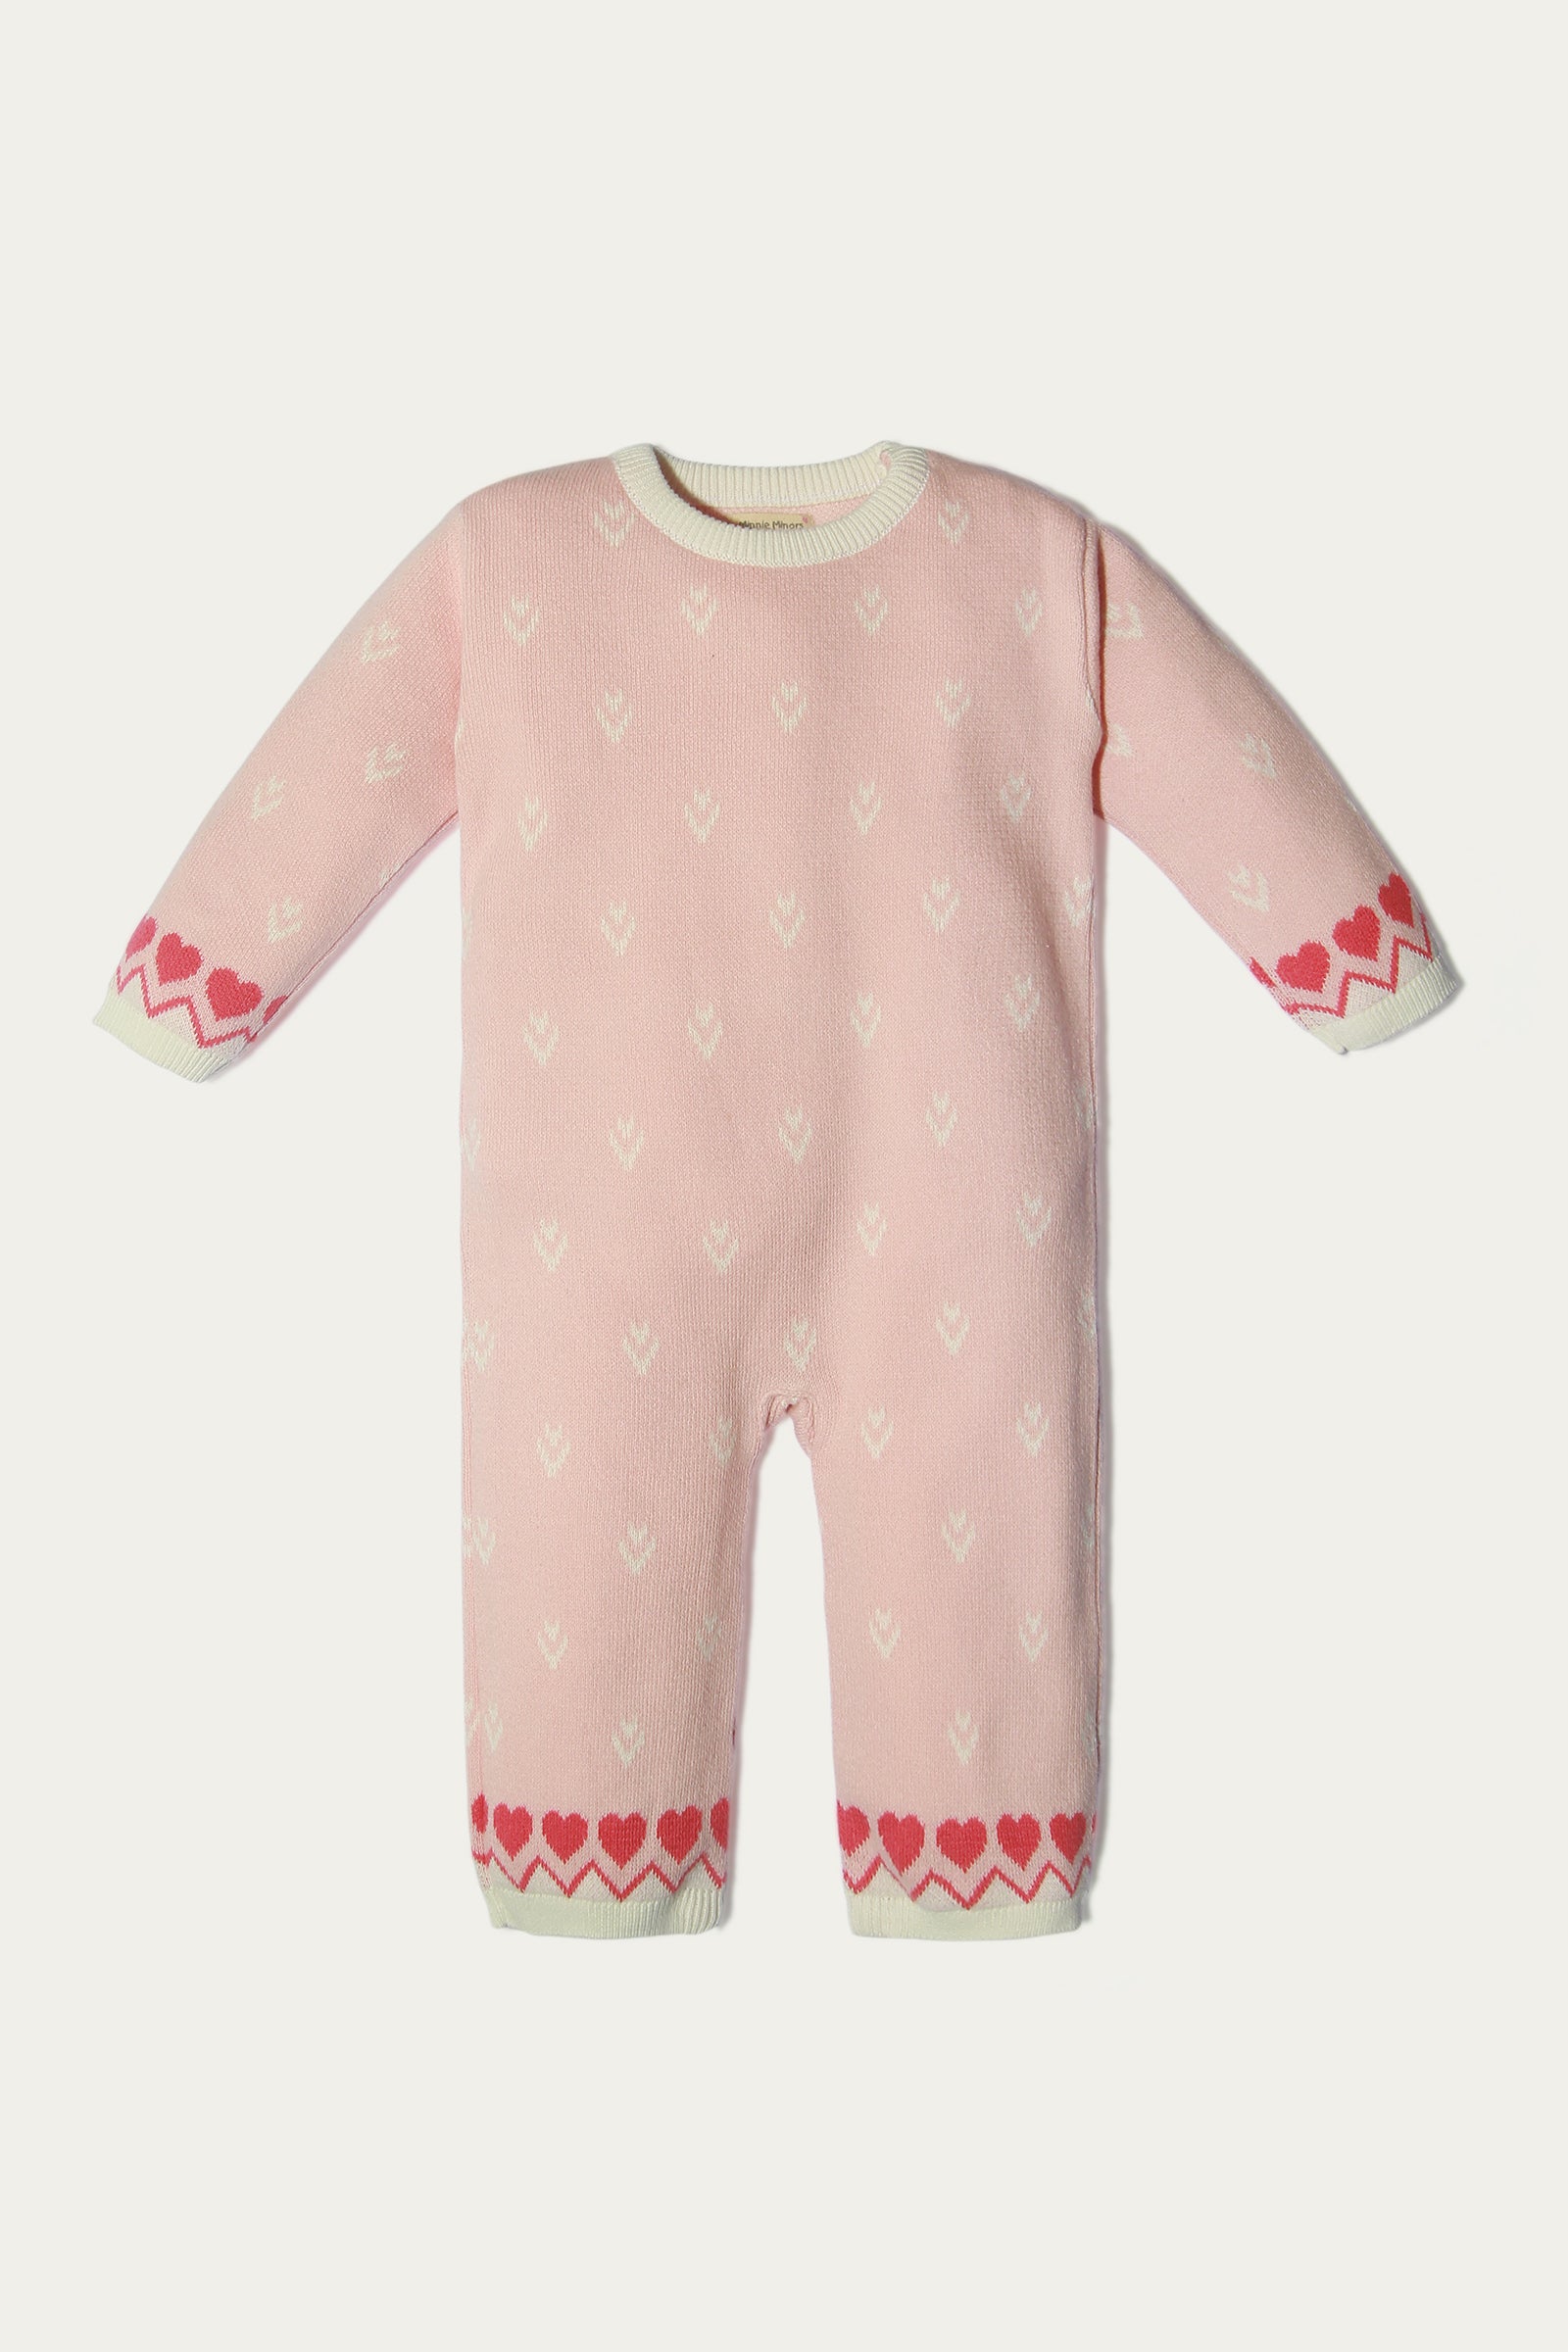 | Online Minors Toddlers Minnie & Babies, Kids for Shop